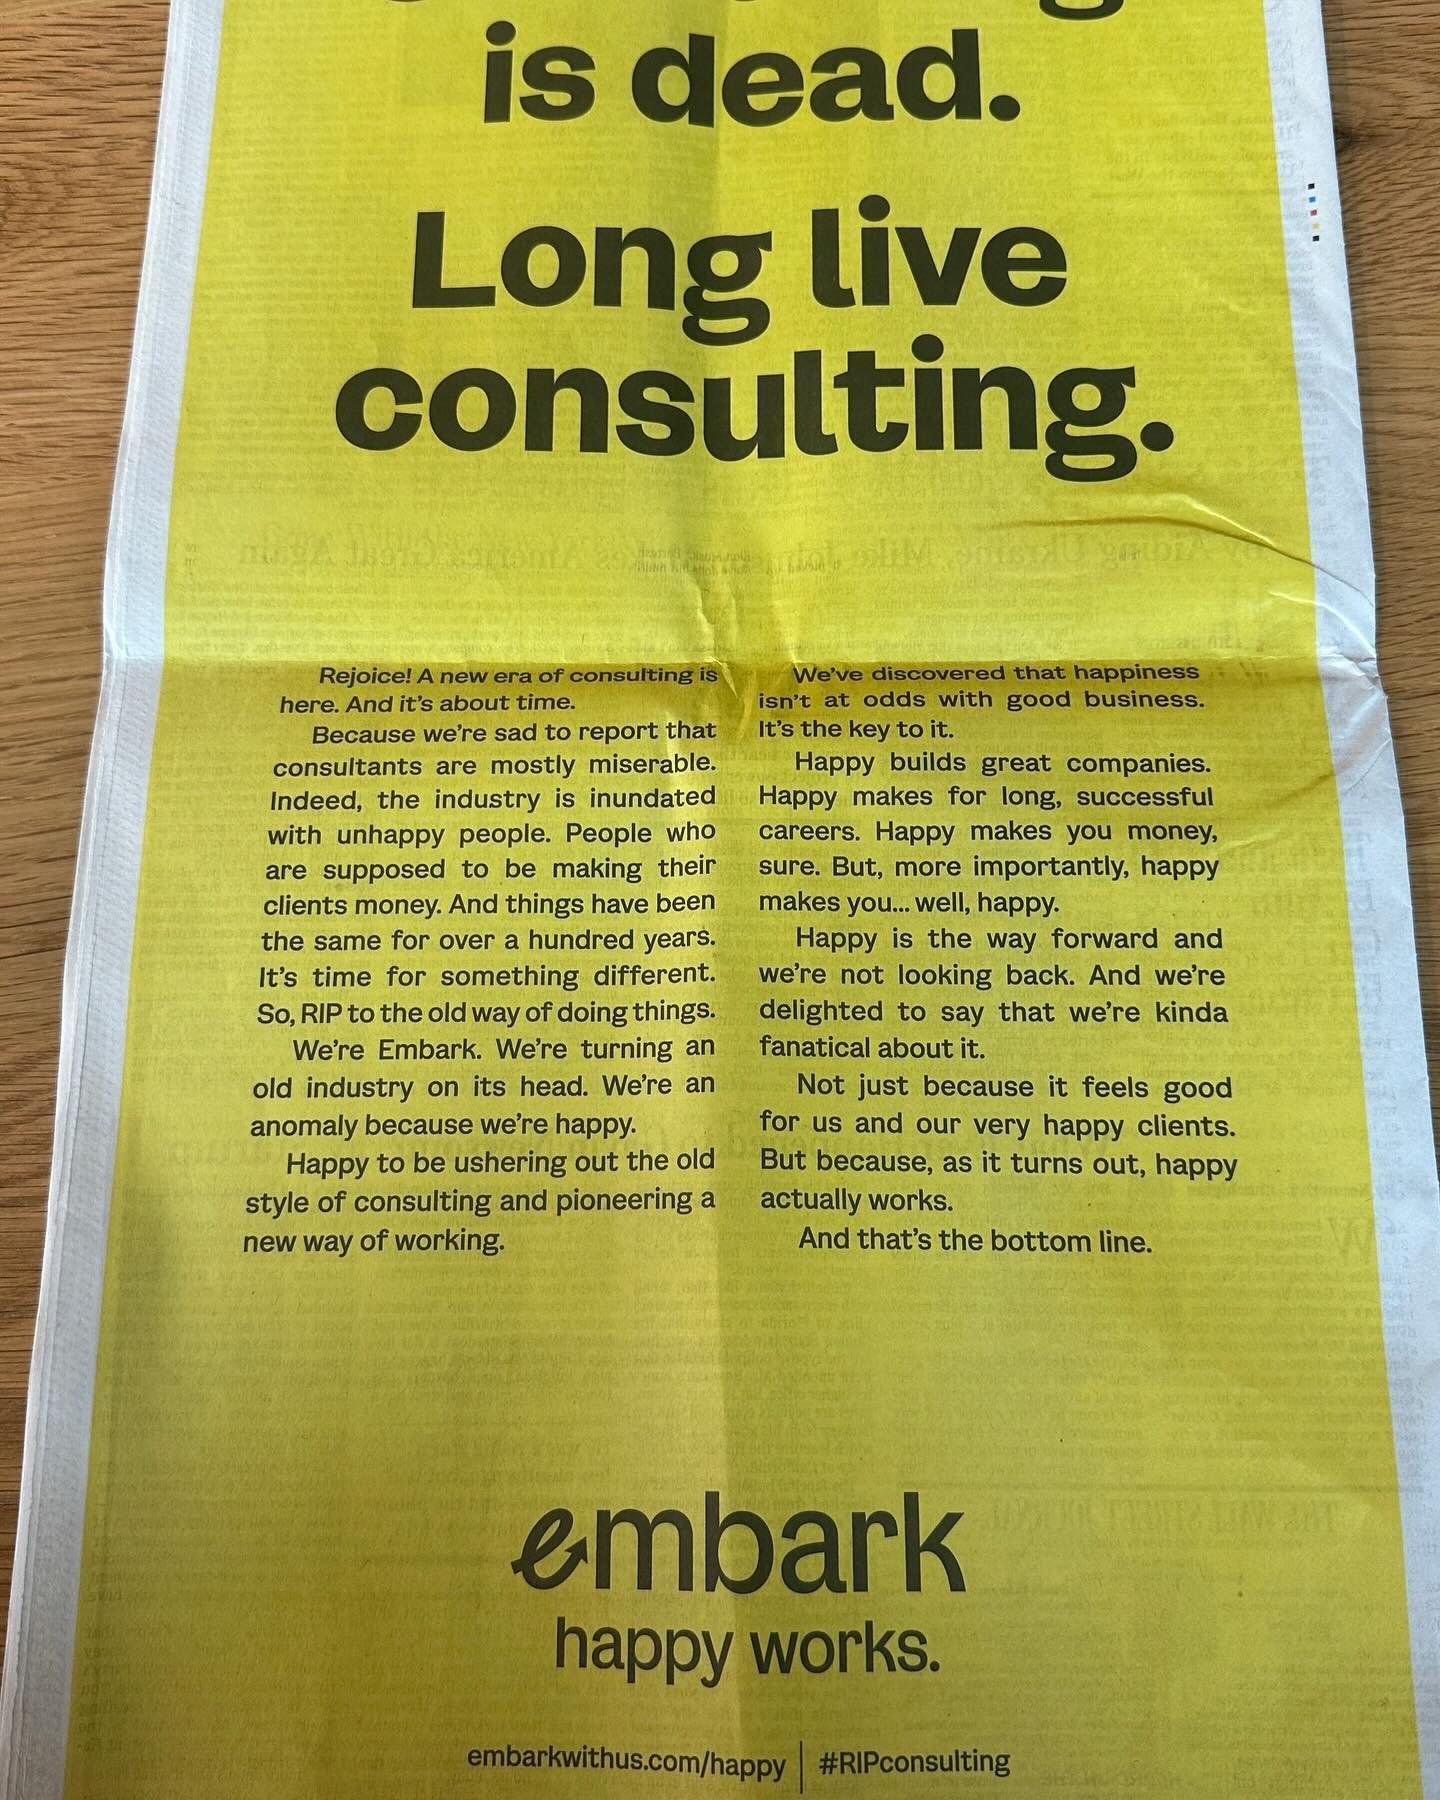 Today, we took out a full page ad in the WSJ, saying Consulting is dead.